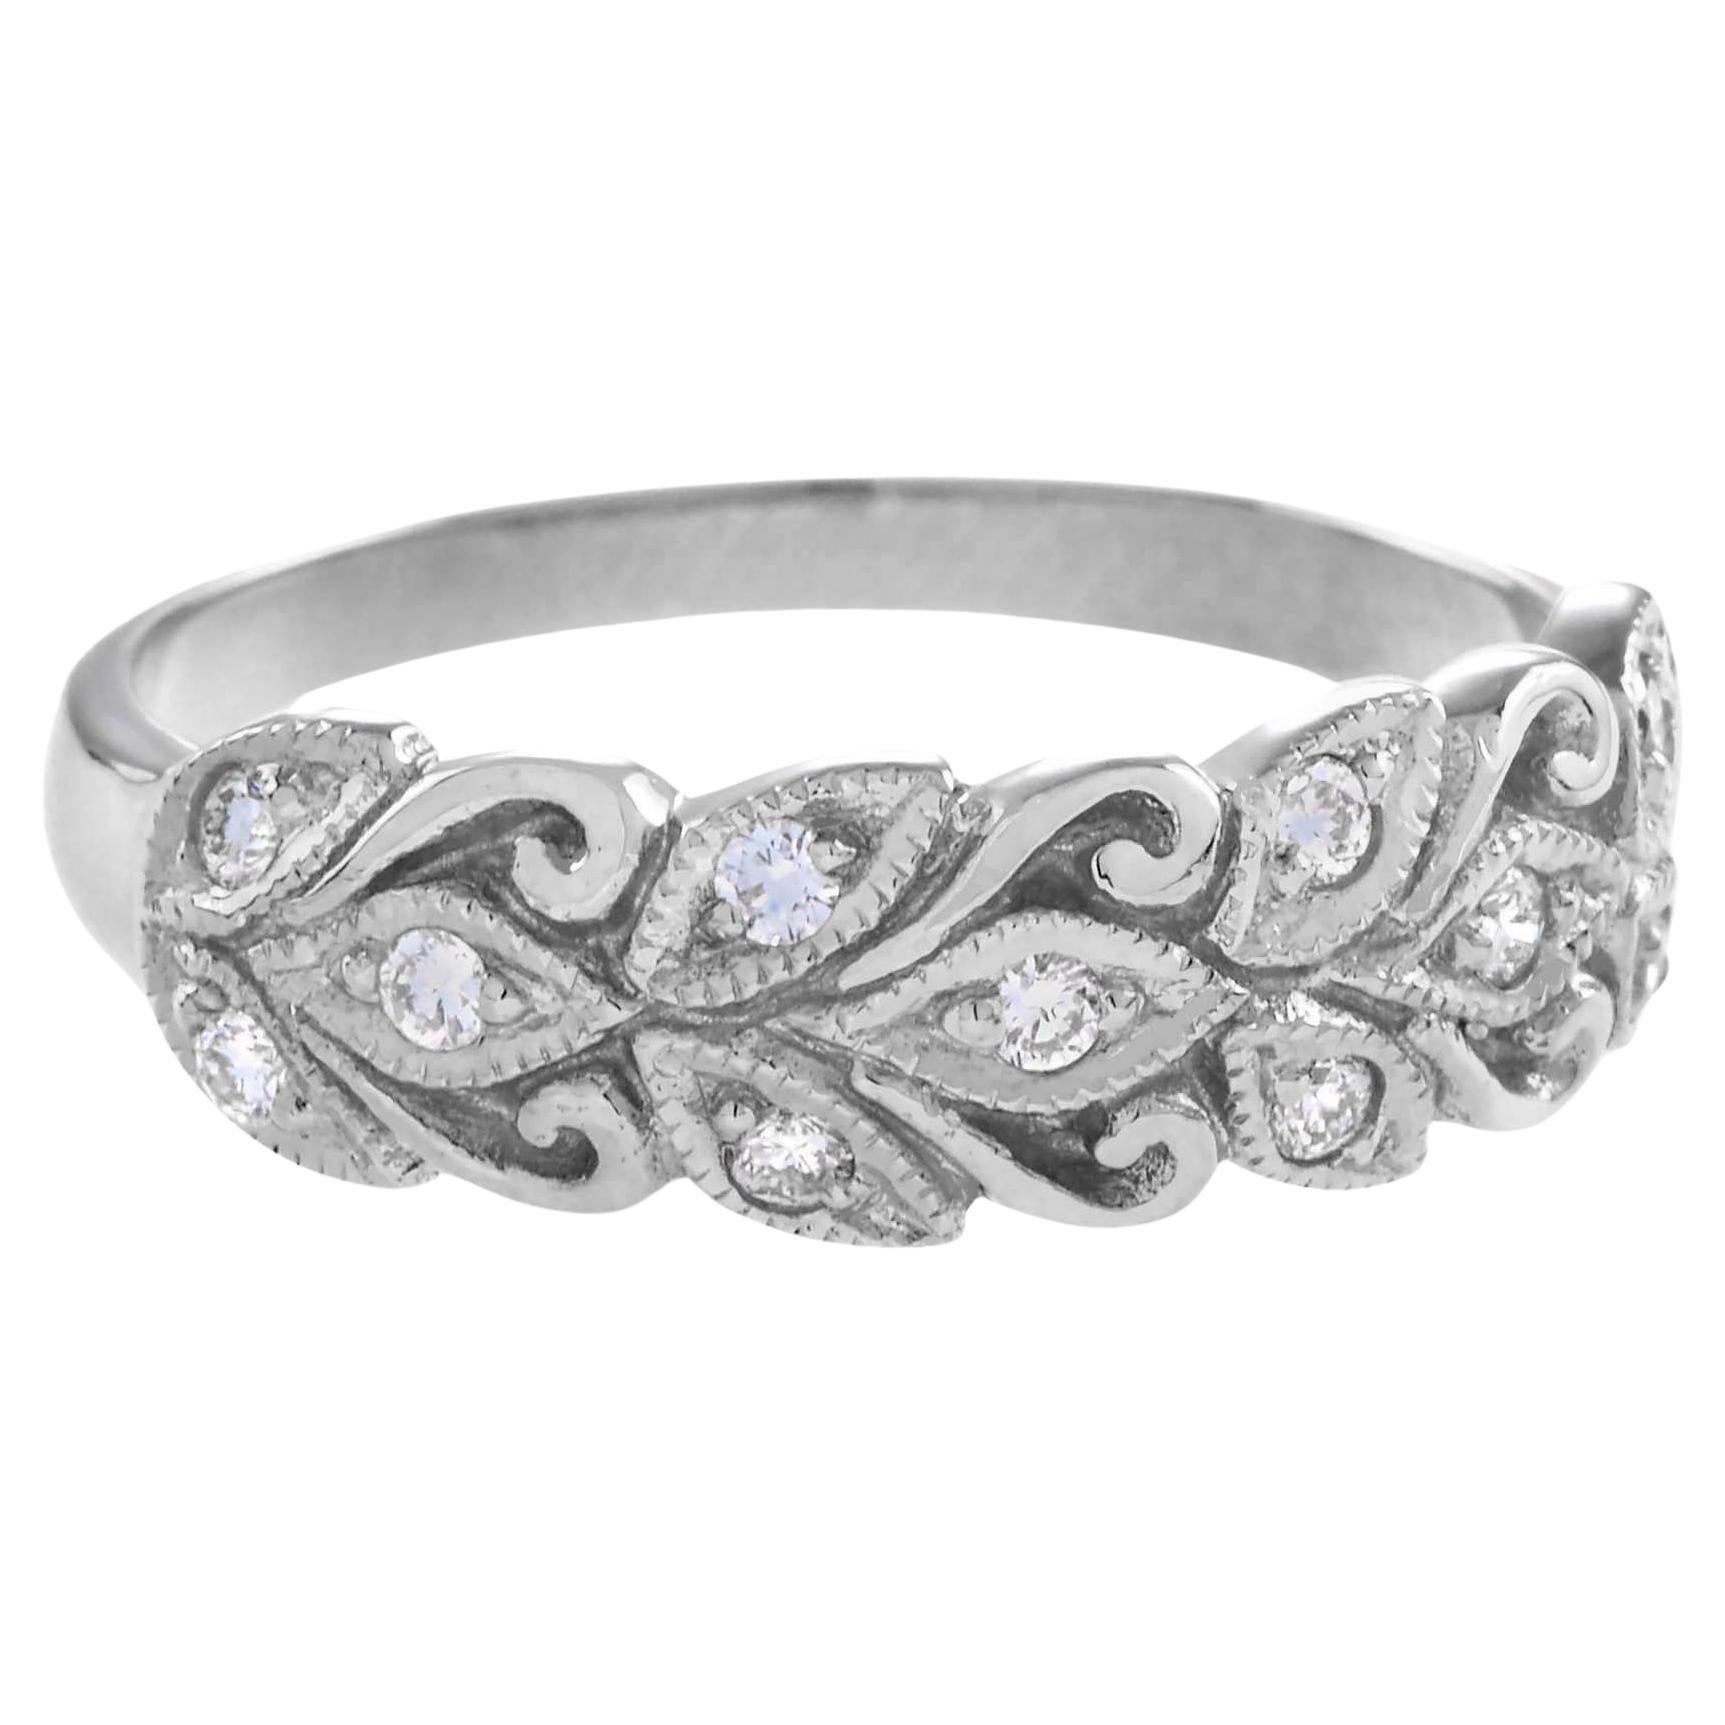 For Sale:  Diamond Floral Motif Band Ring in 9K White Gold